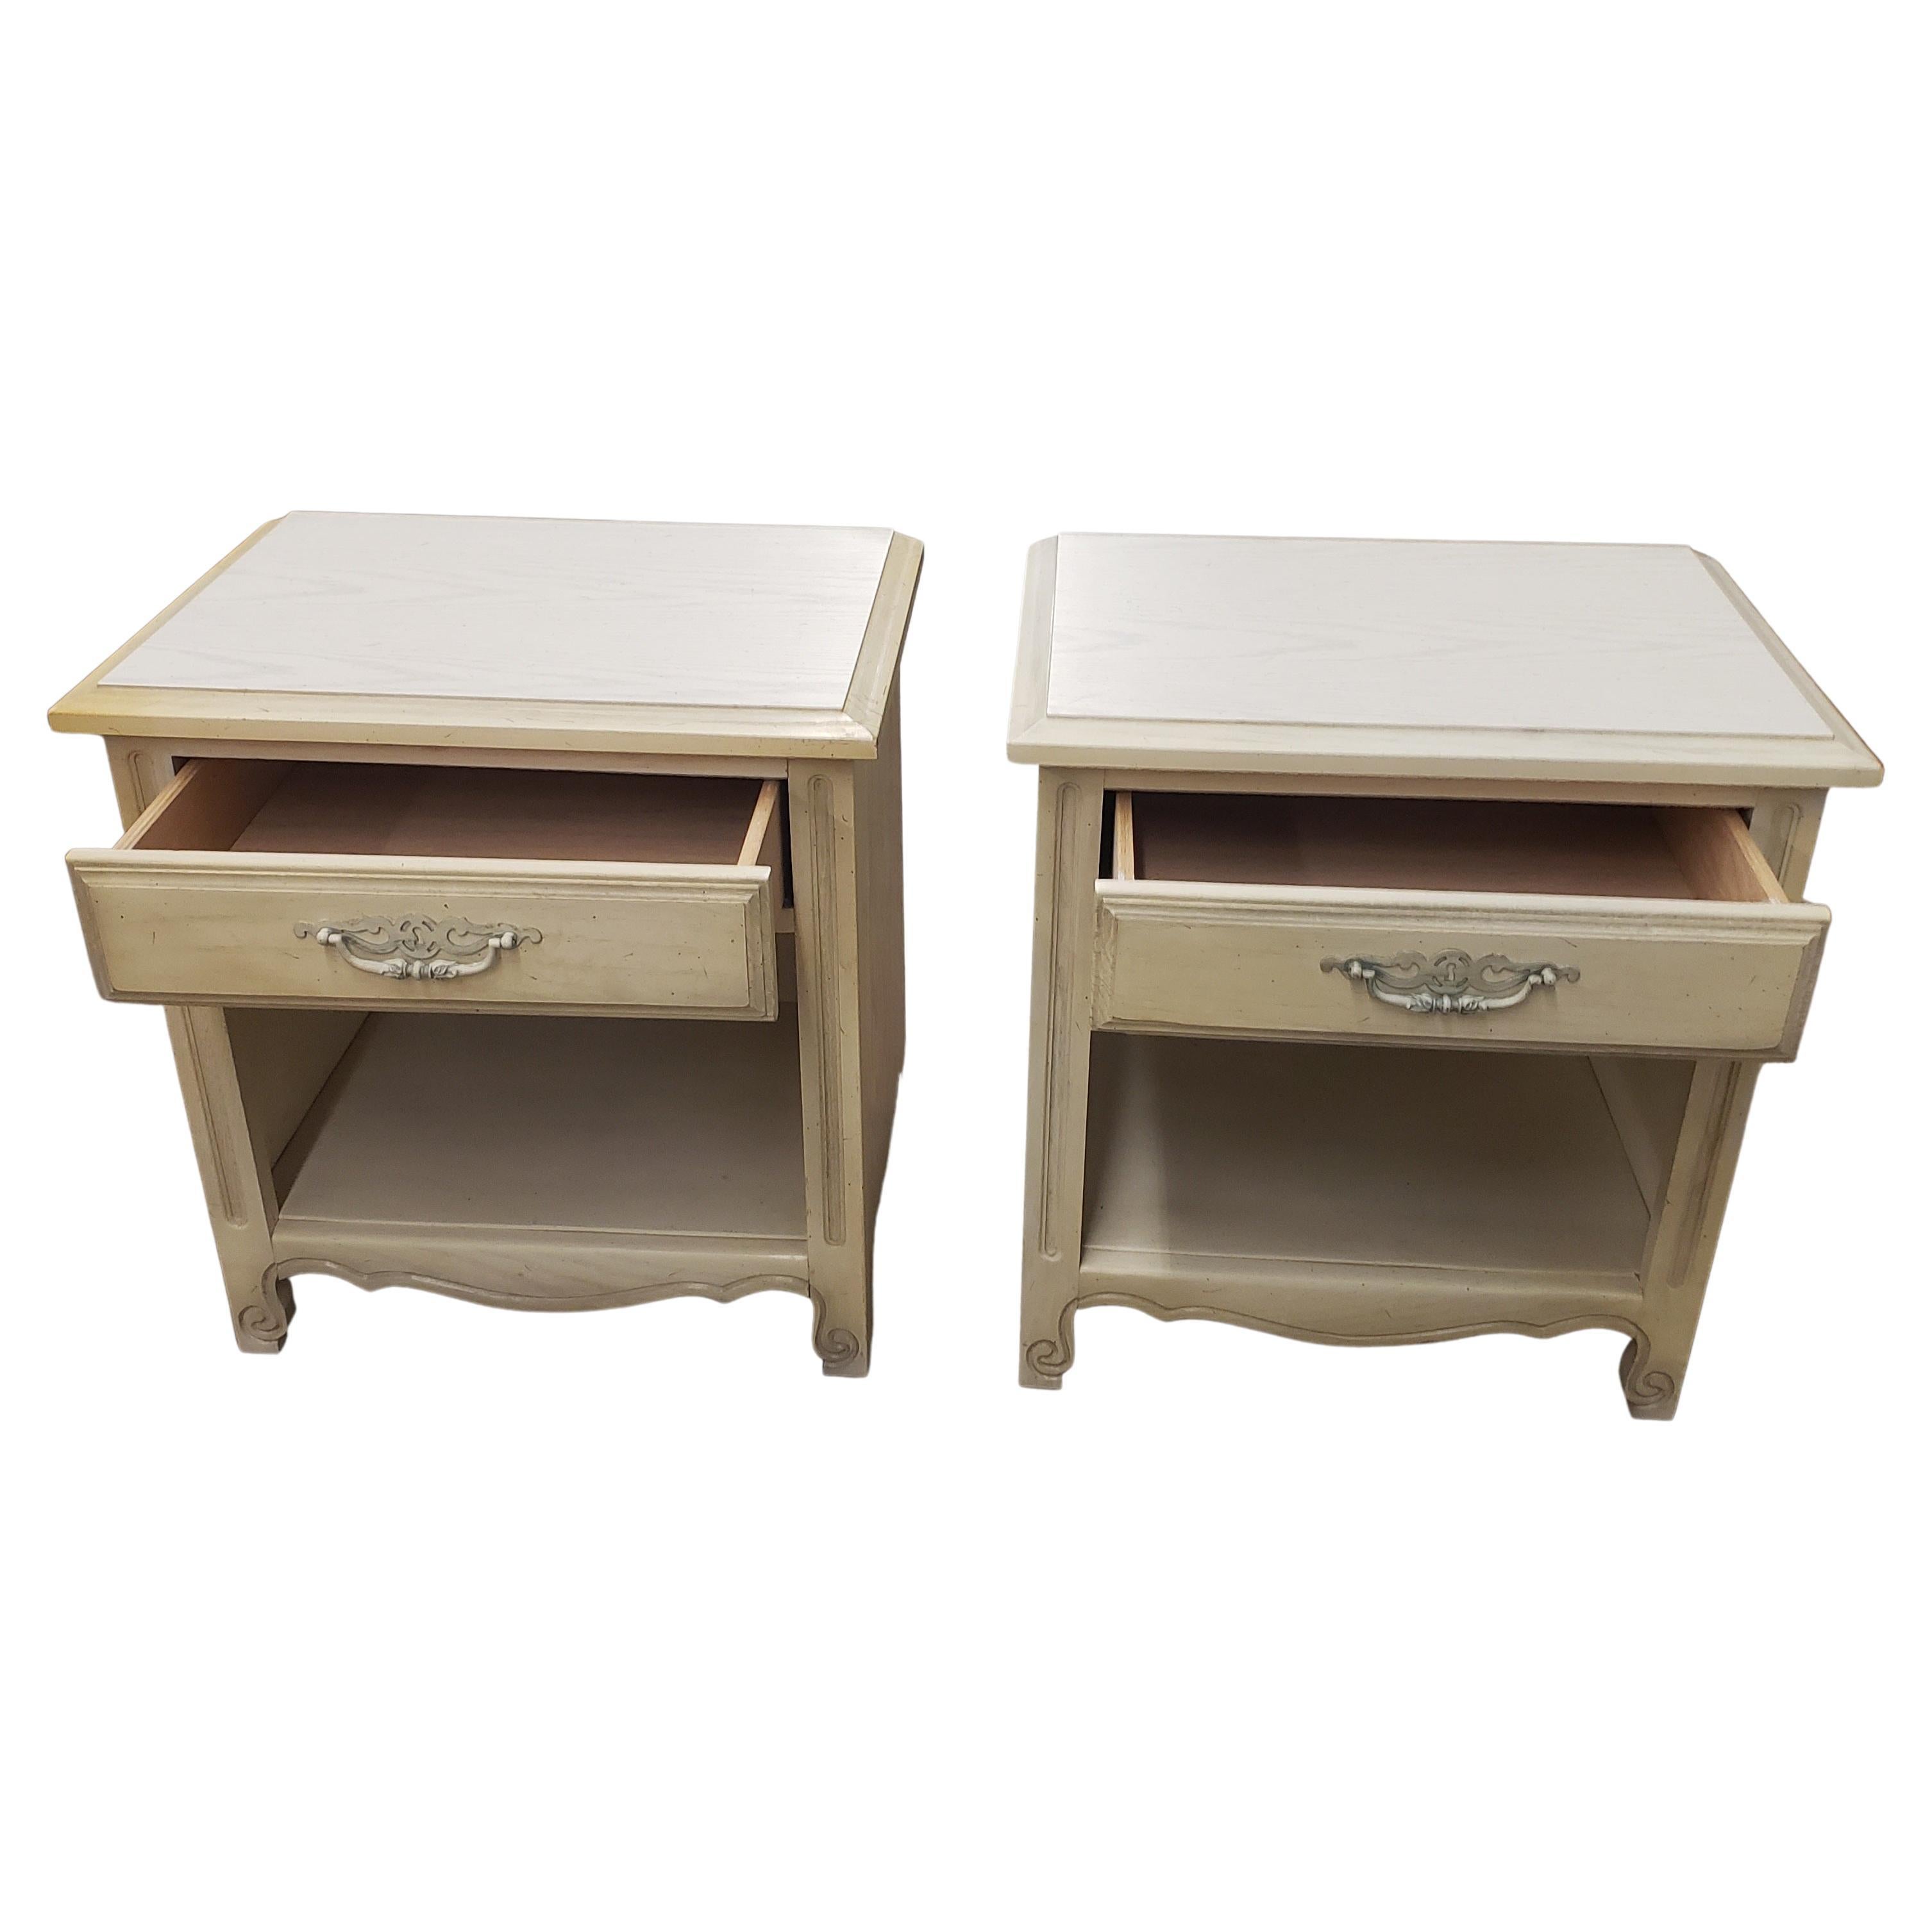 Vintage Kenlea Crafts Solid Oak French Provincial Bedside Tables, a Pair In Excellent Condition For Sale In Germantown, MD